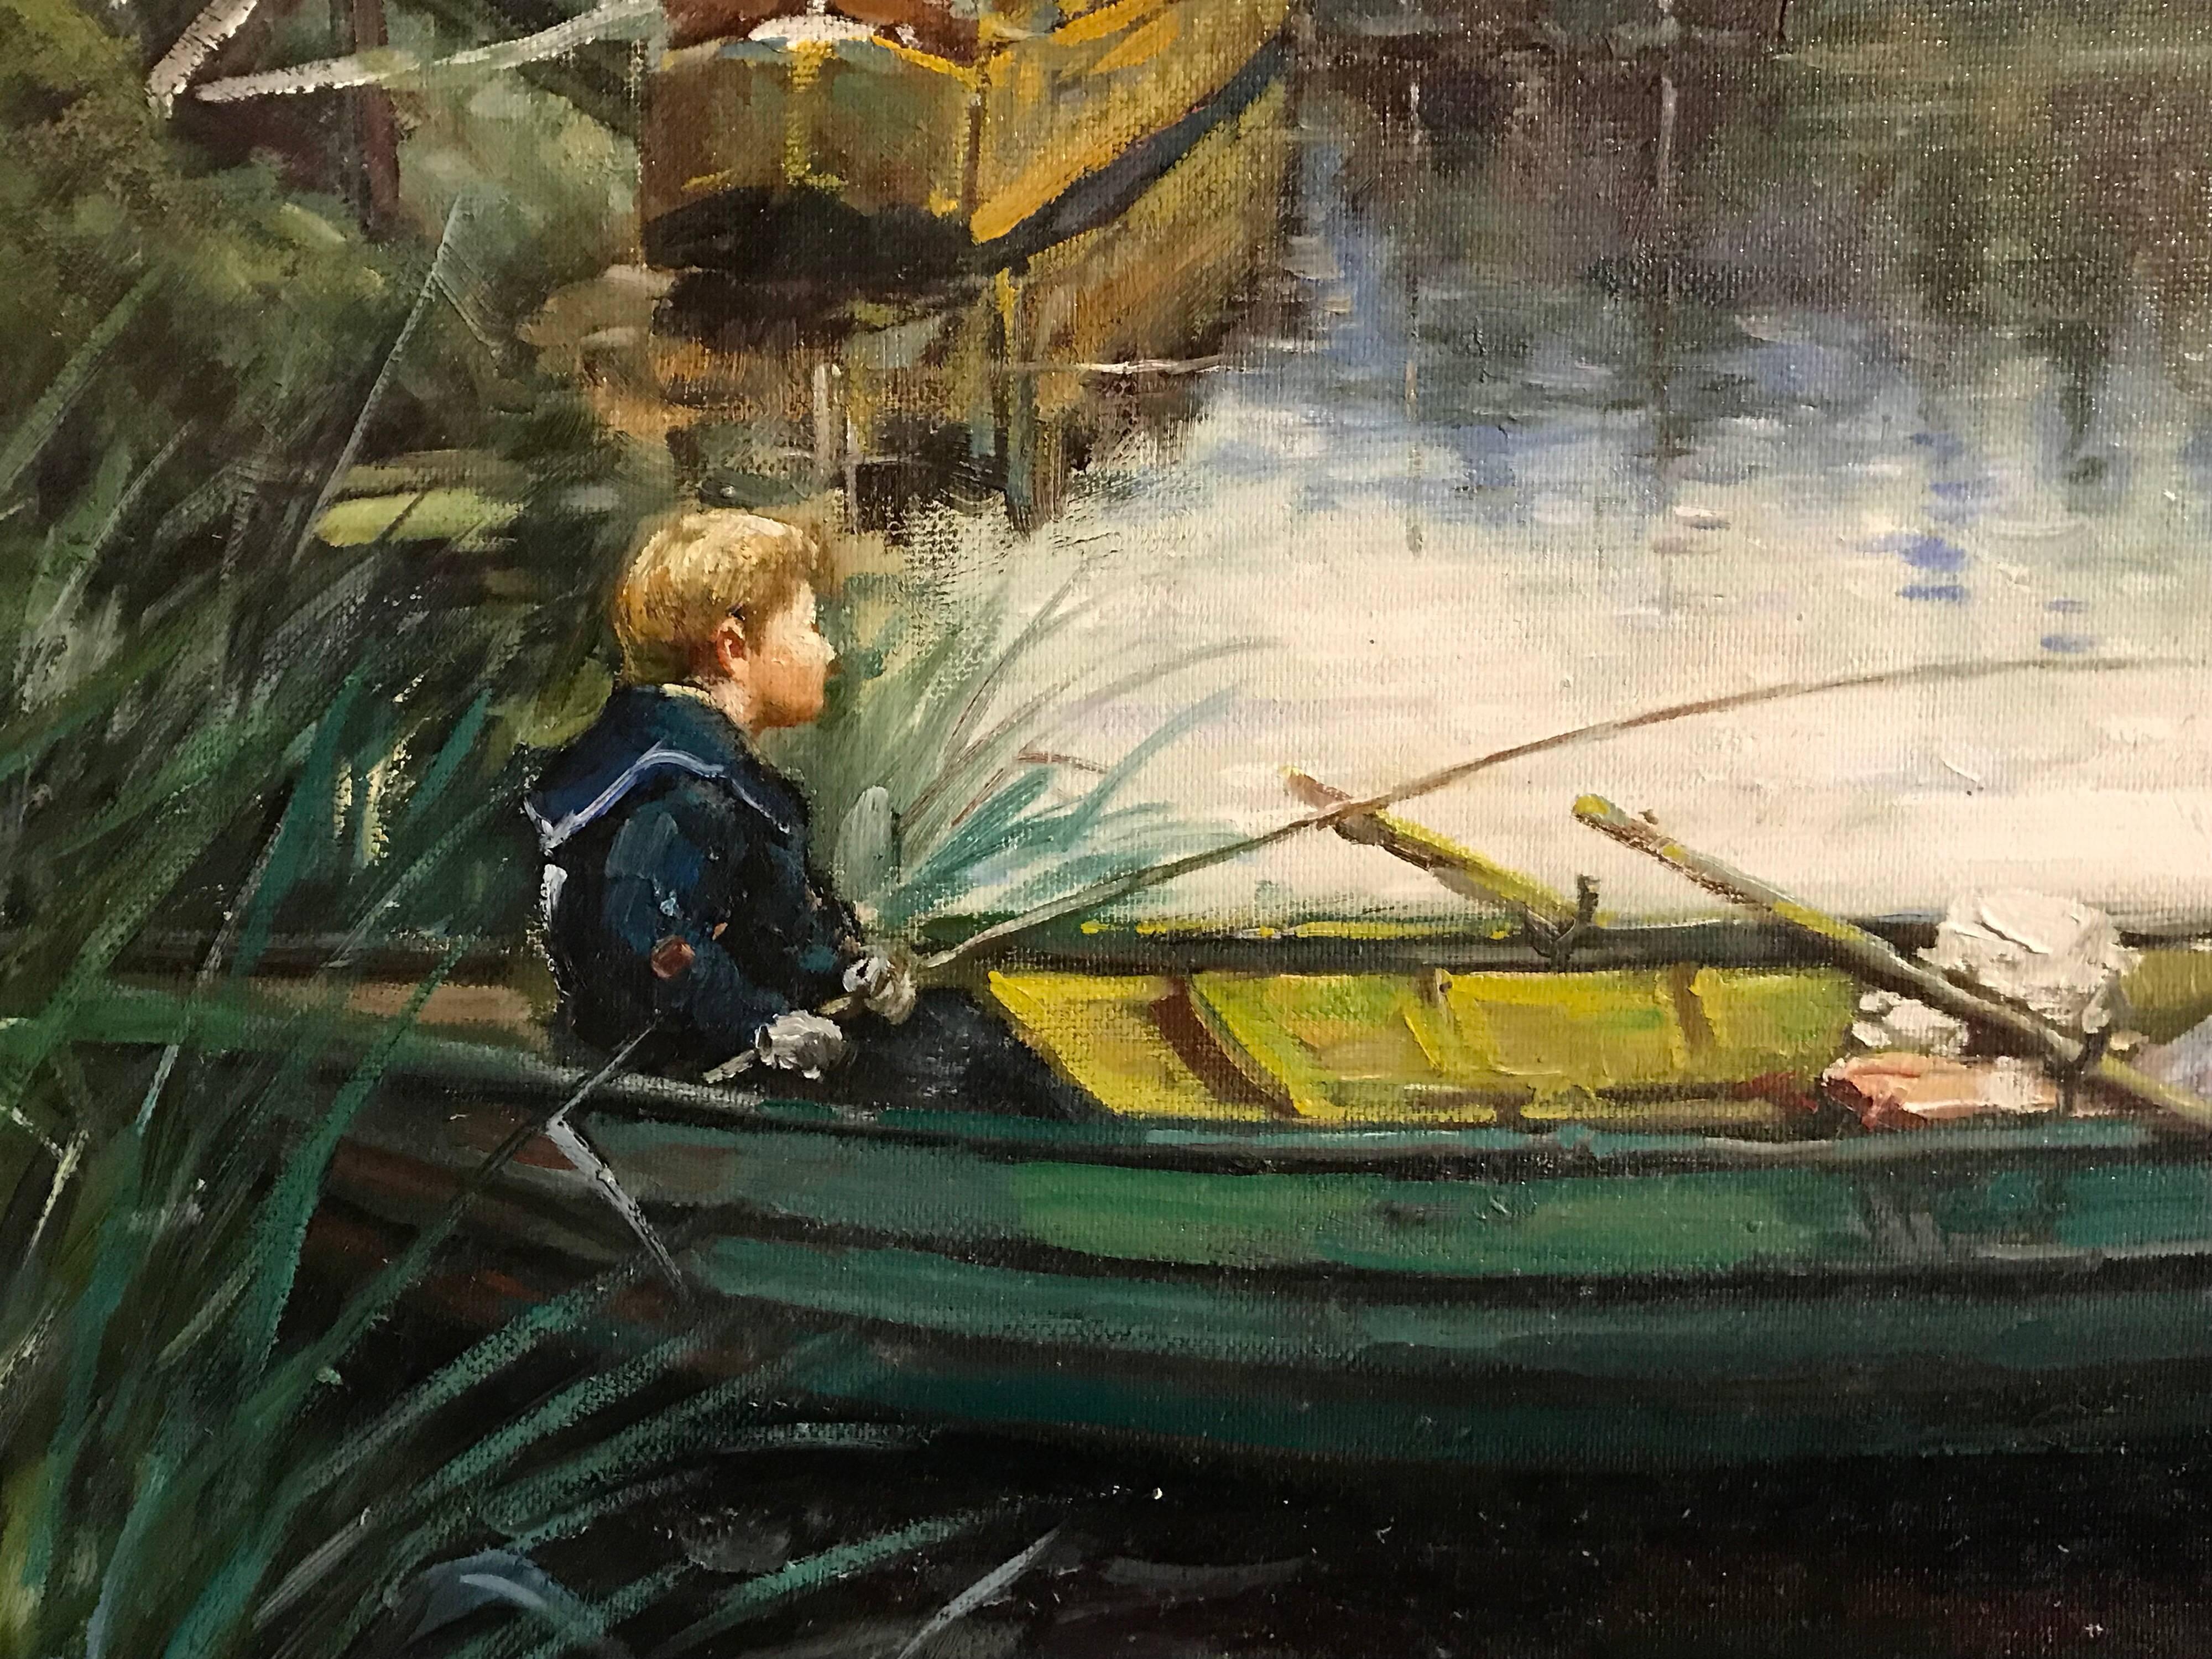 Punting on the River, large oil painting on canvas - Black Landscape Painting by Unknown